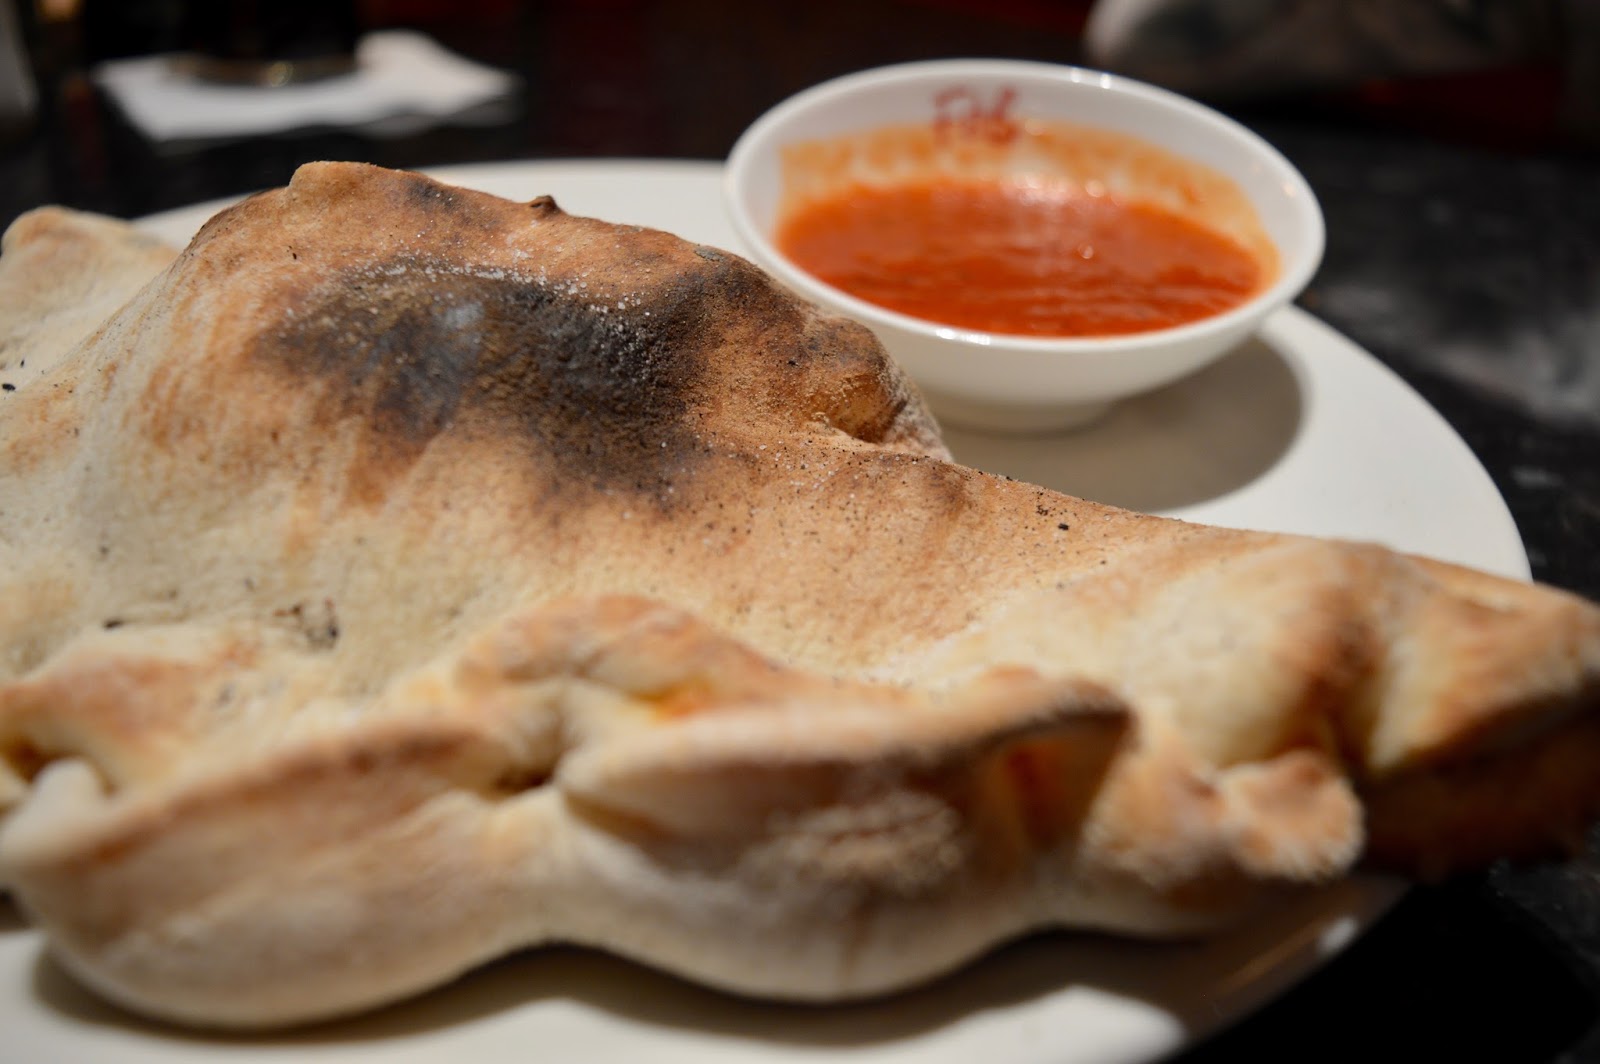 New Cineworld Cinema & Family Restaurants at Dalton Park Retail Outlet in County Durham (Just off A19) - Frankie and Benny's - lunch menu calzone pizza